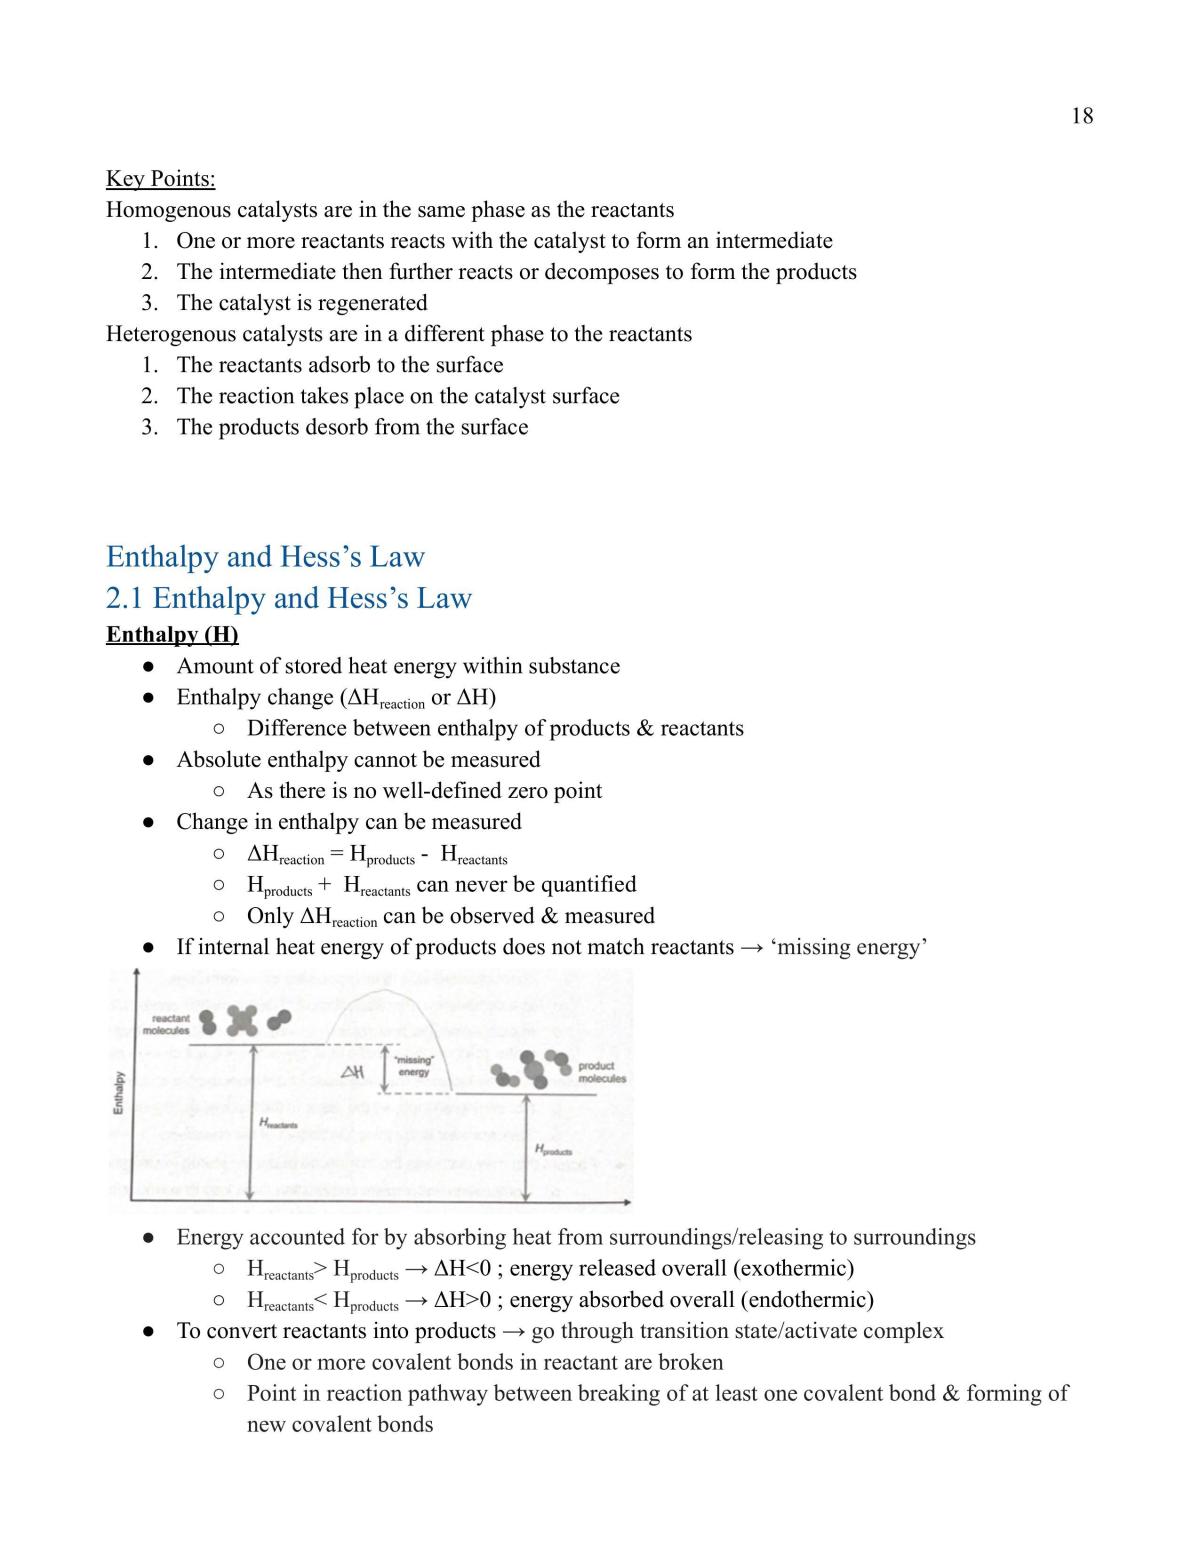 Chemistry Module 4: Drivers of Reactions Notes - Page 18